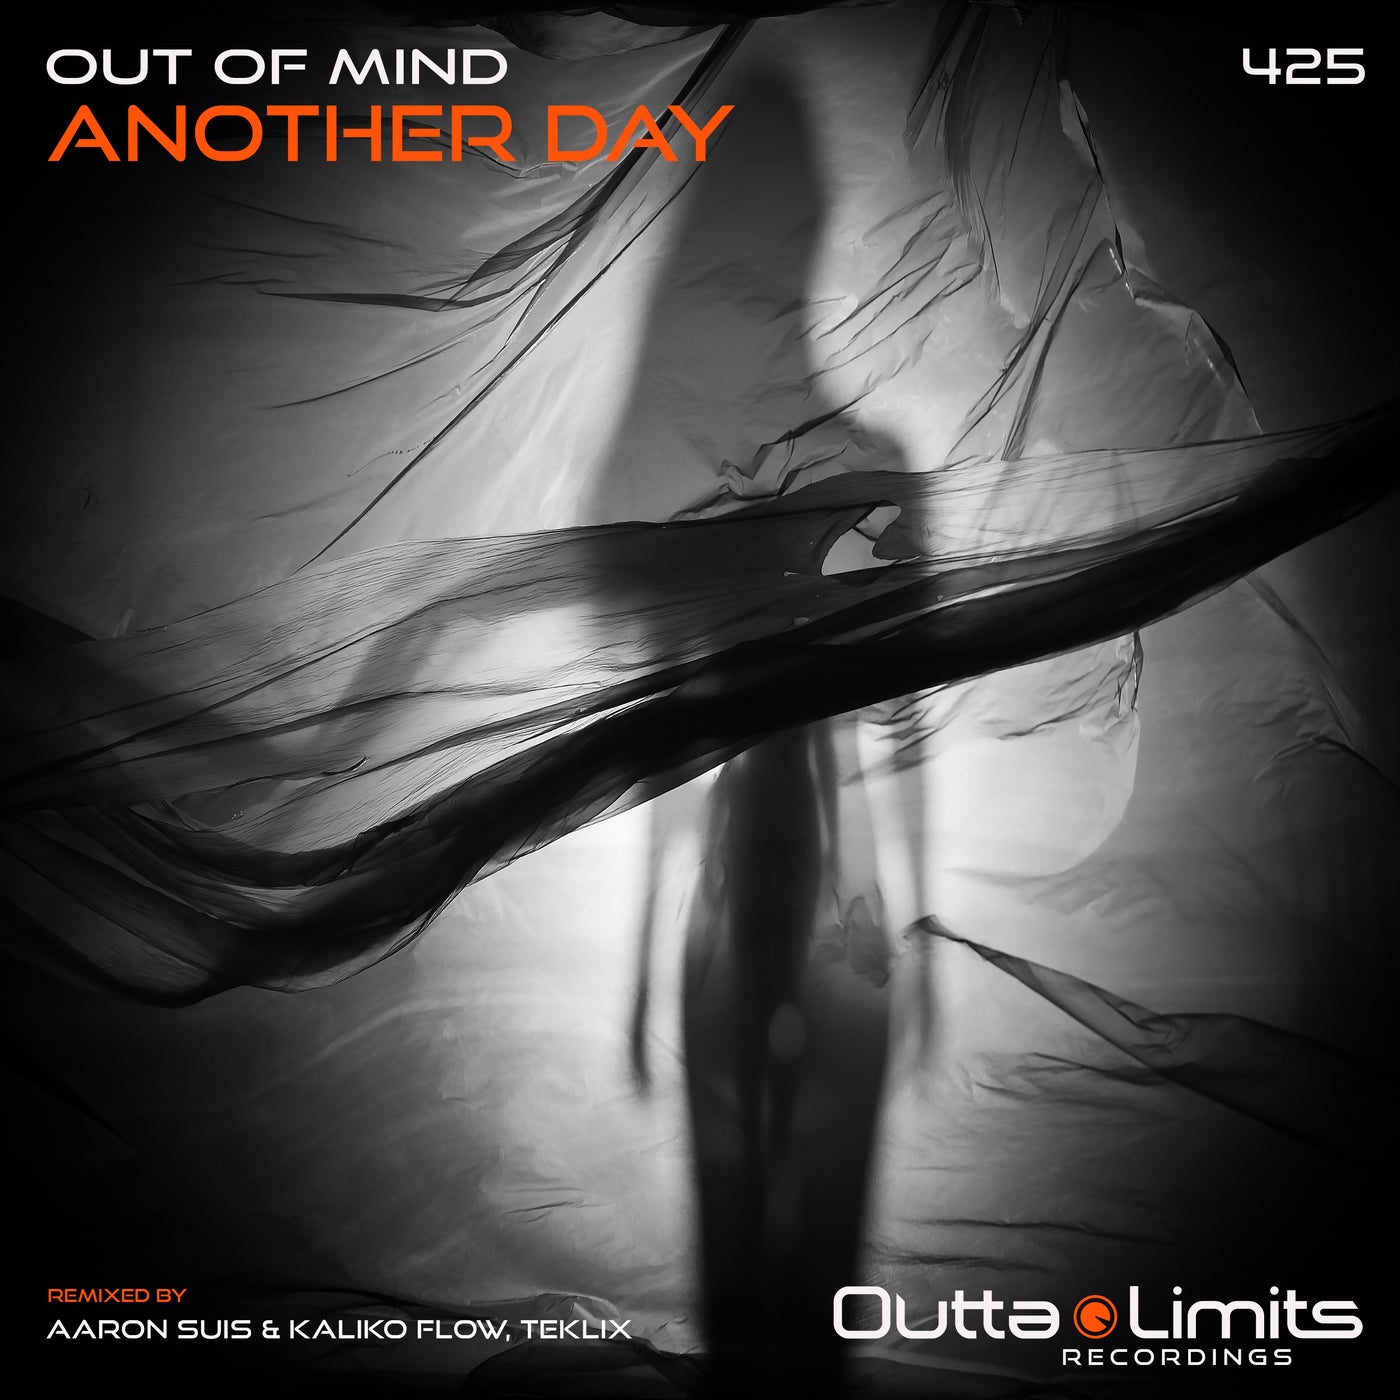 Out Of Mind - Another Day (teklix Remix) on Revolution Radio